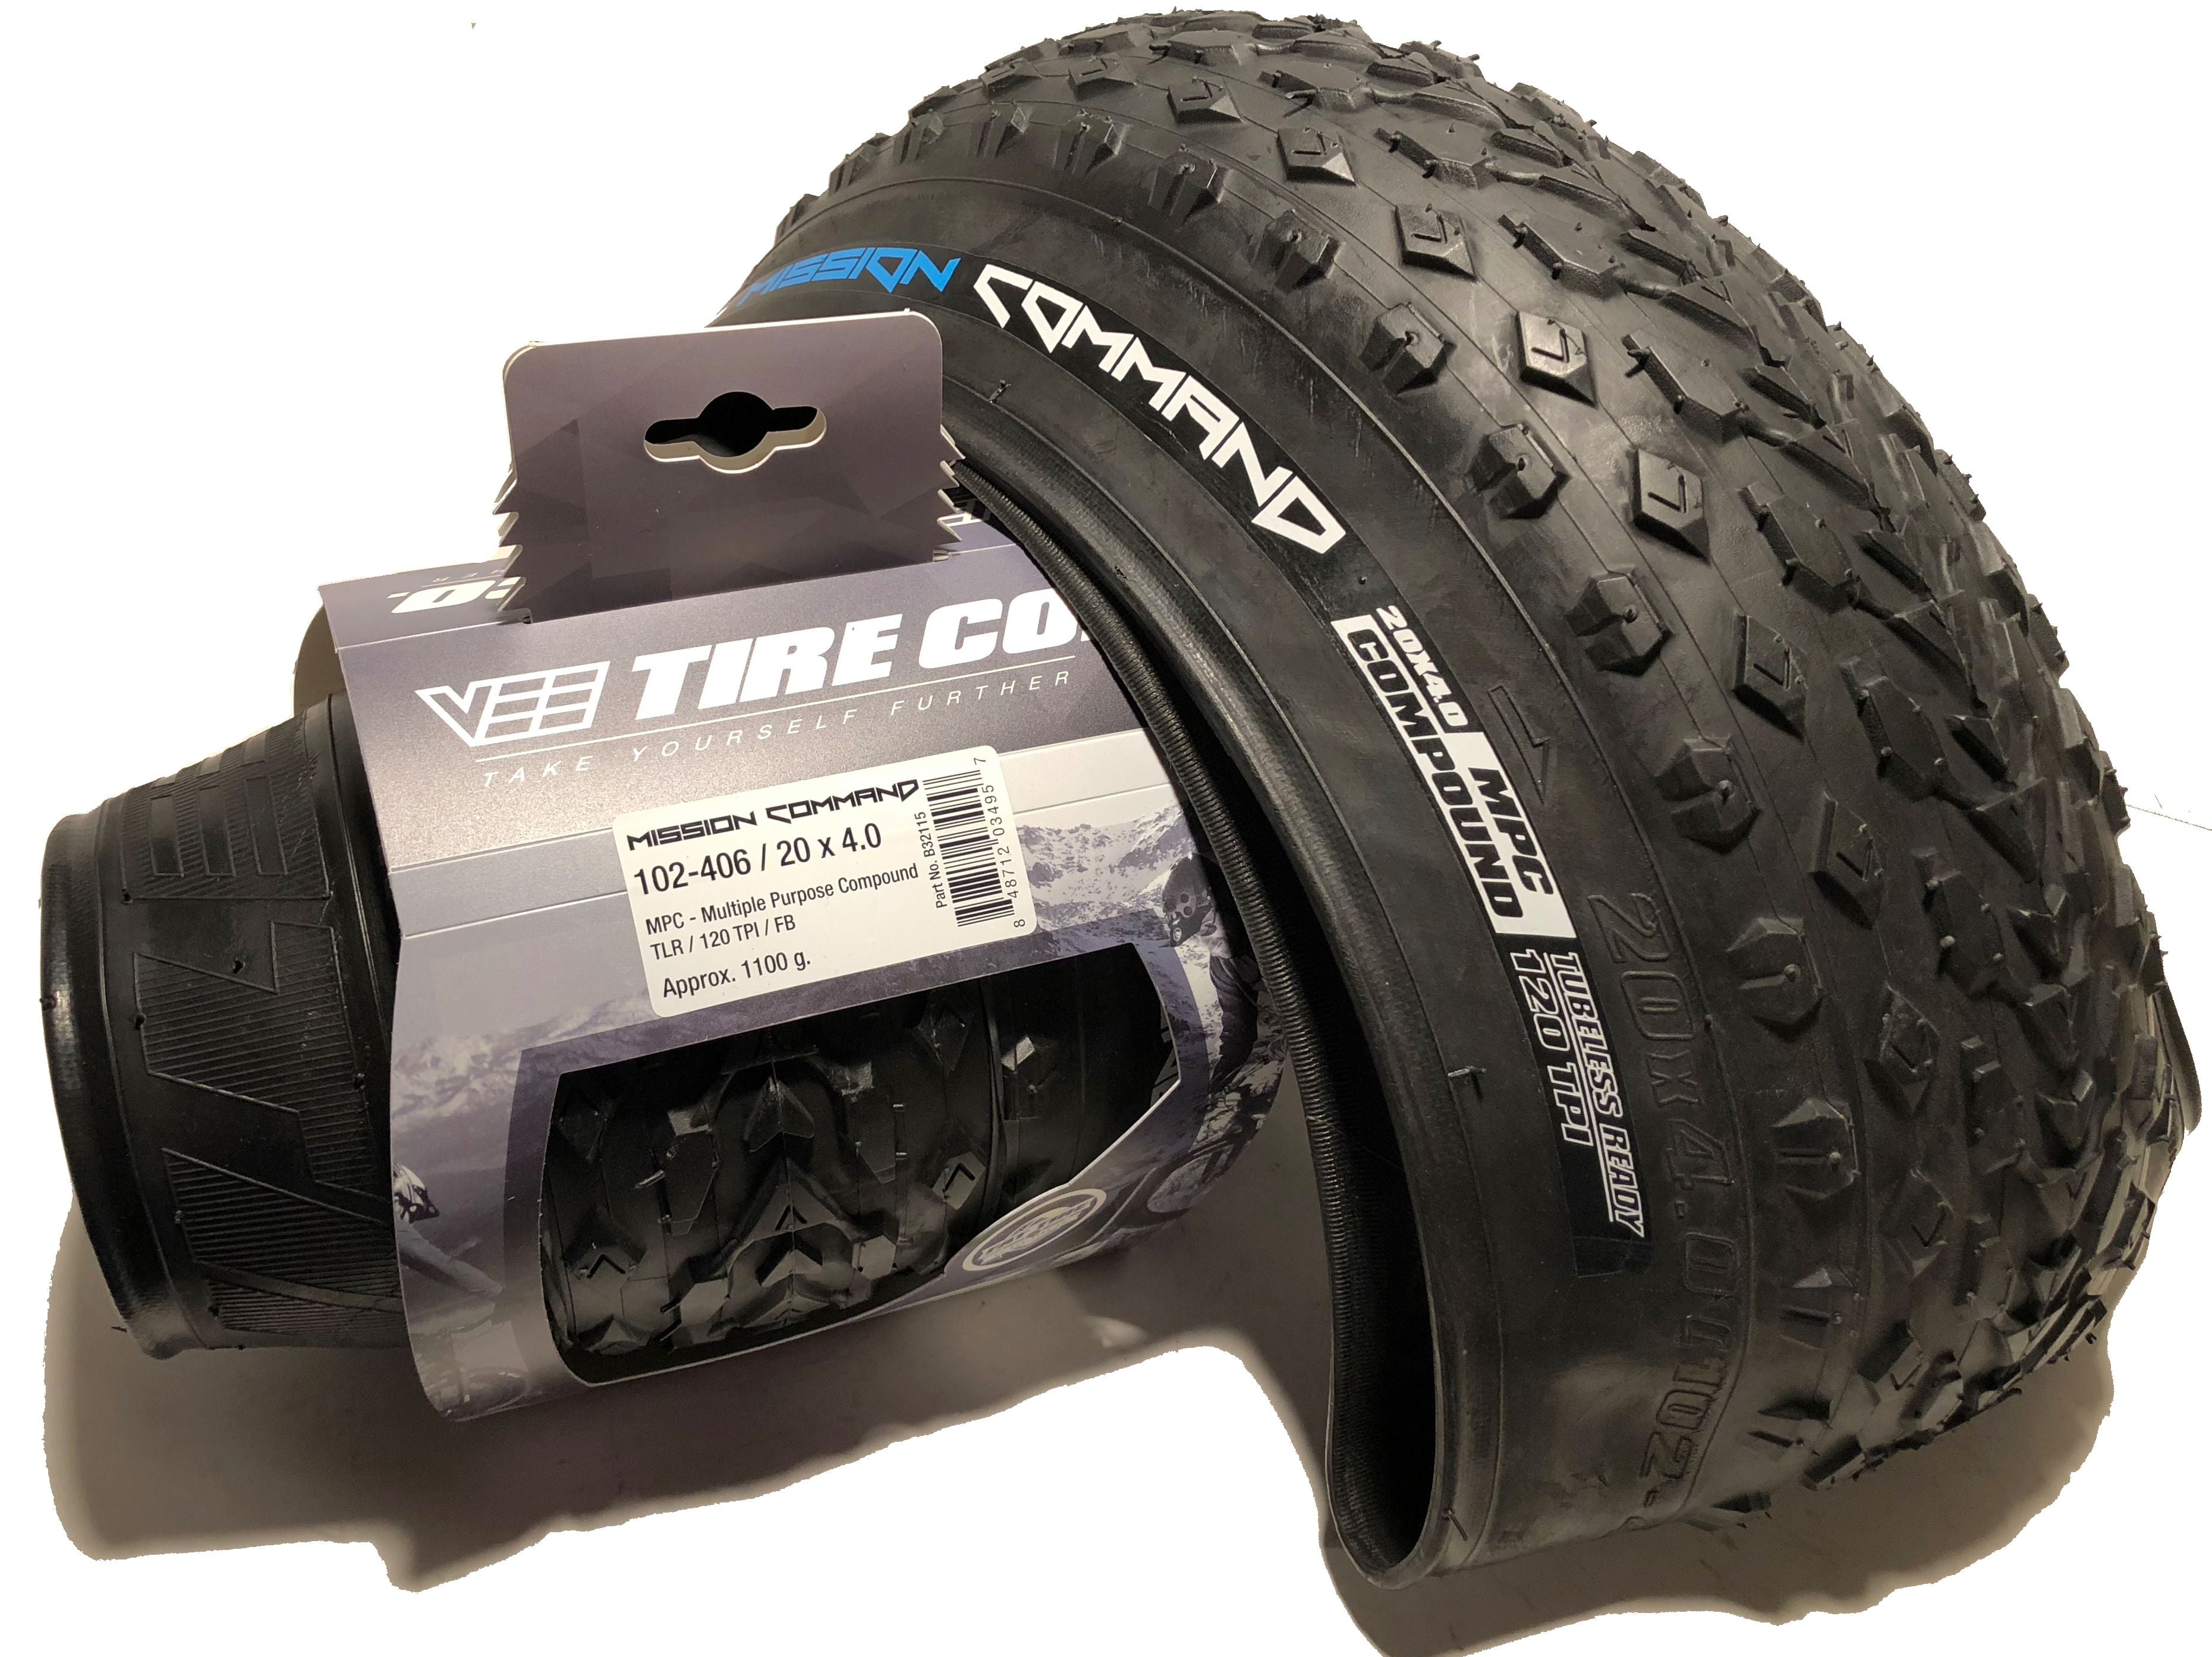 Vee Tire 20x4.0 Mission Command Tubeless Ready TLR Fat Bike Folding 1 or 2 Tyres 